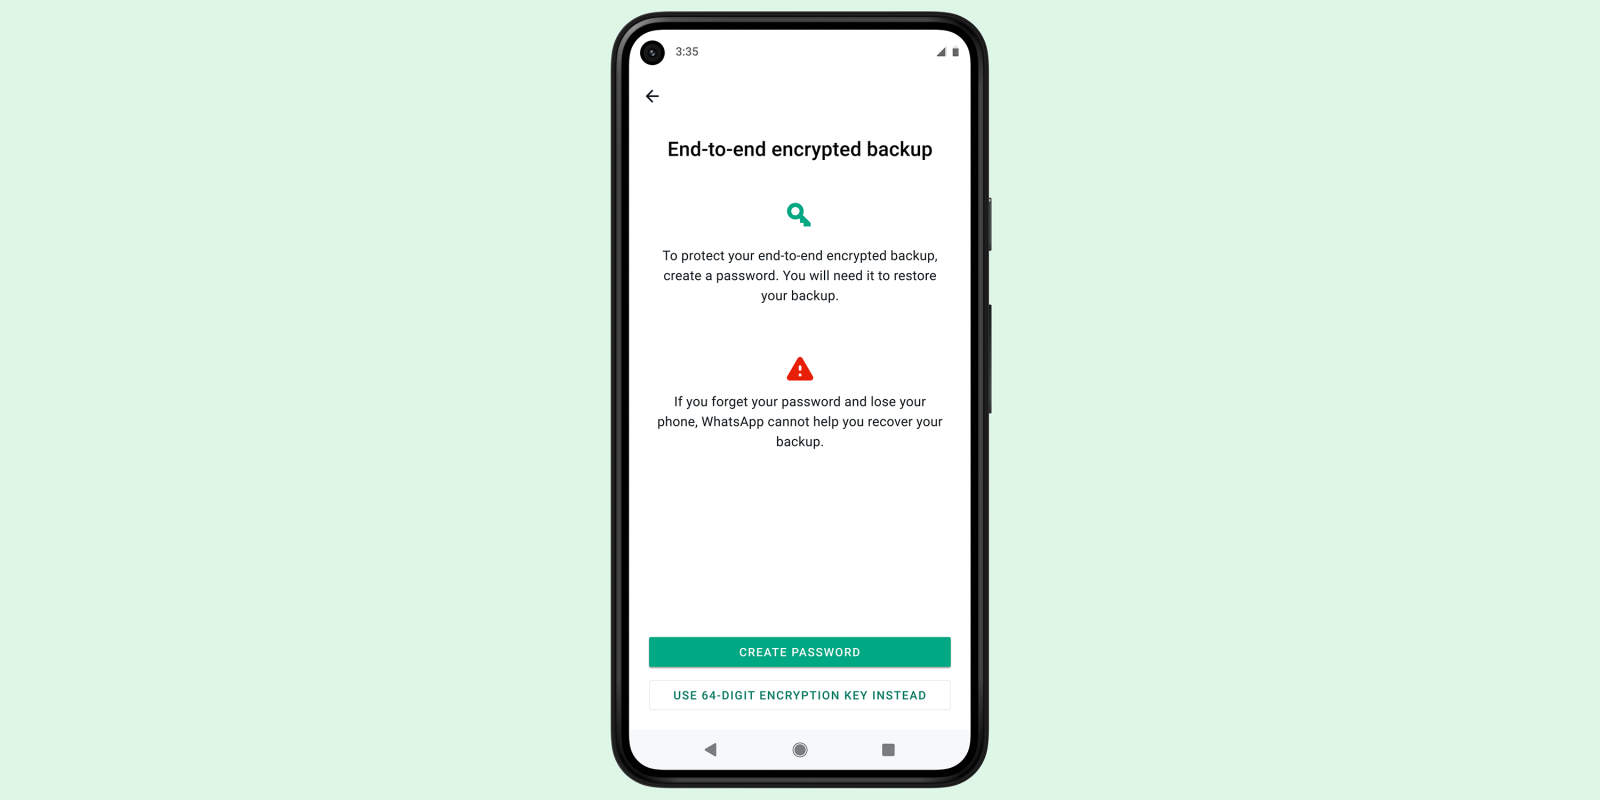 WhatsApp end-to-end encrypted backups